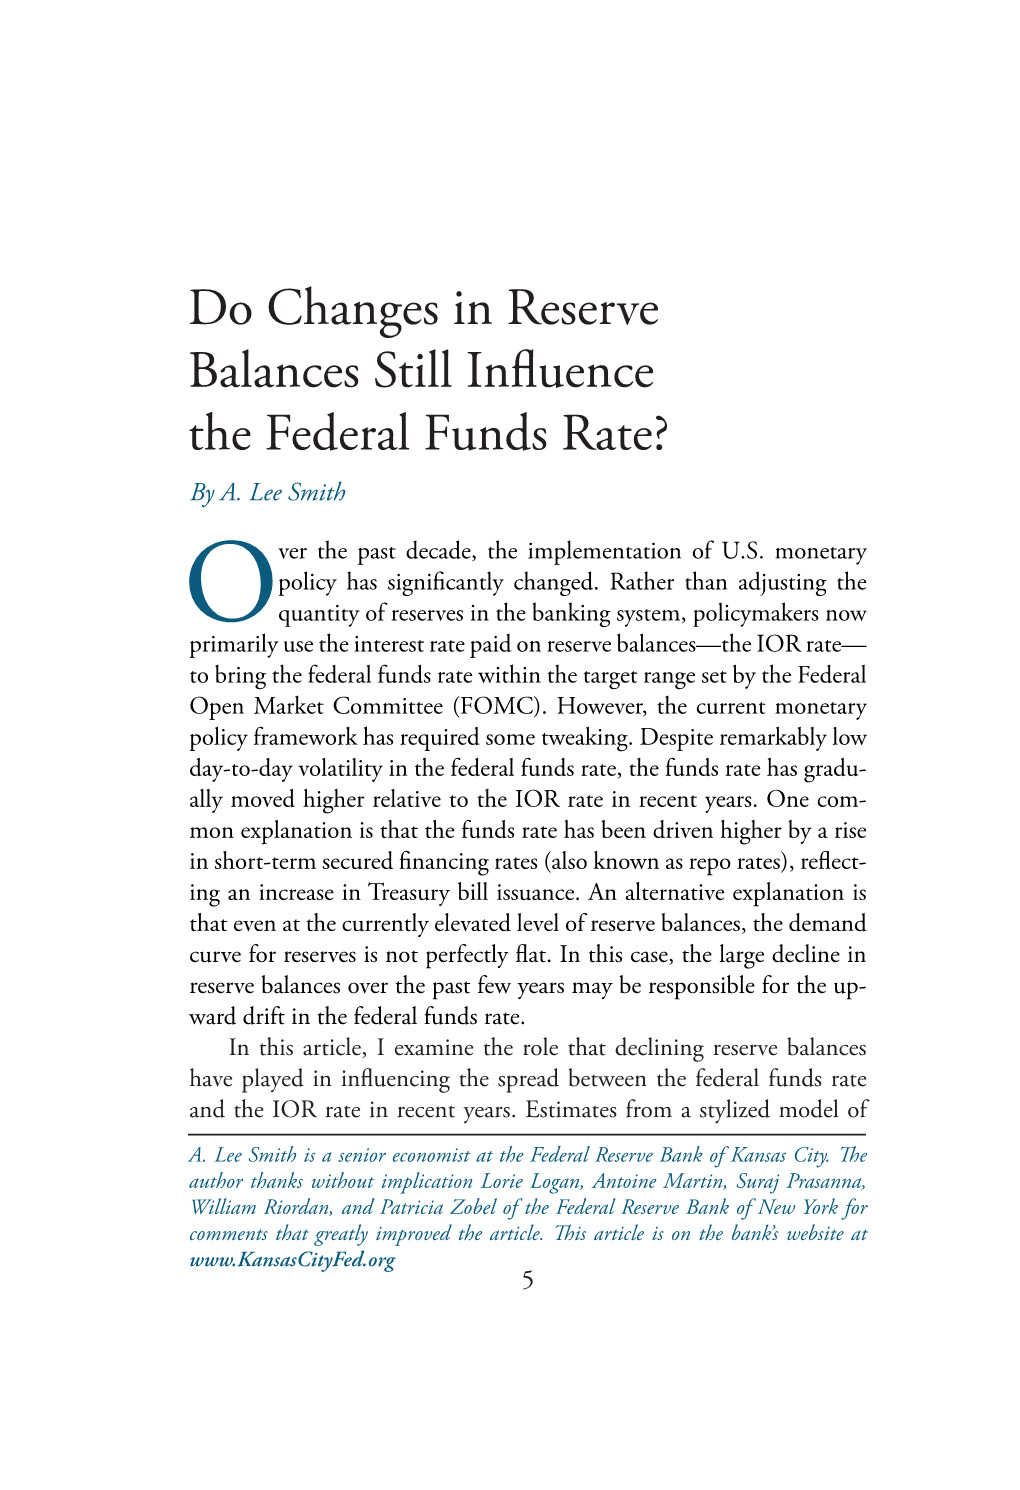 Do Changes in Reserve Balances Still Influence the Federal Funds Rate? by A